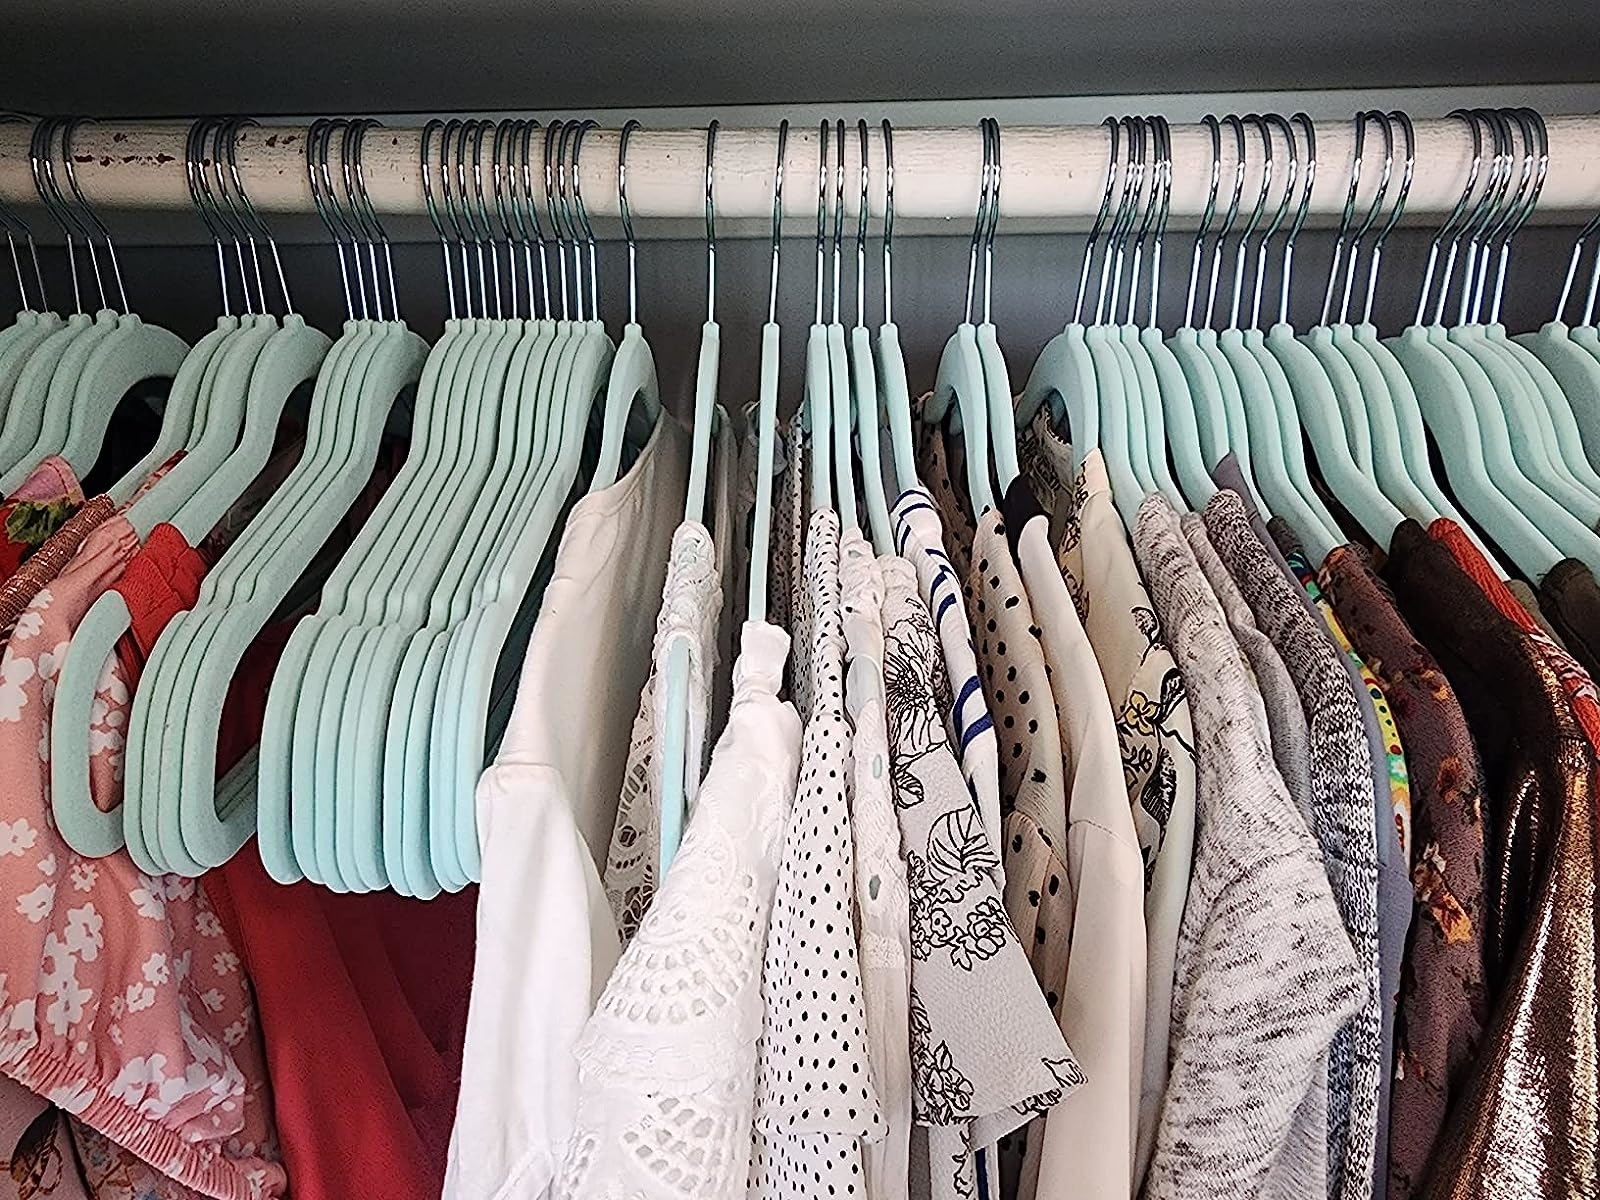 Reviewer image of the blue hangers in their closet